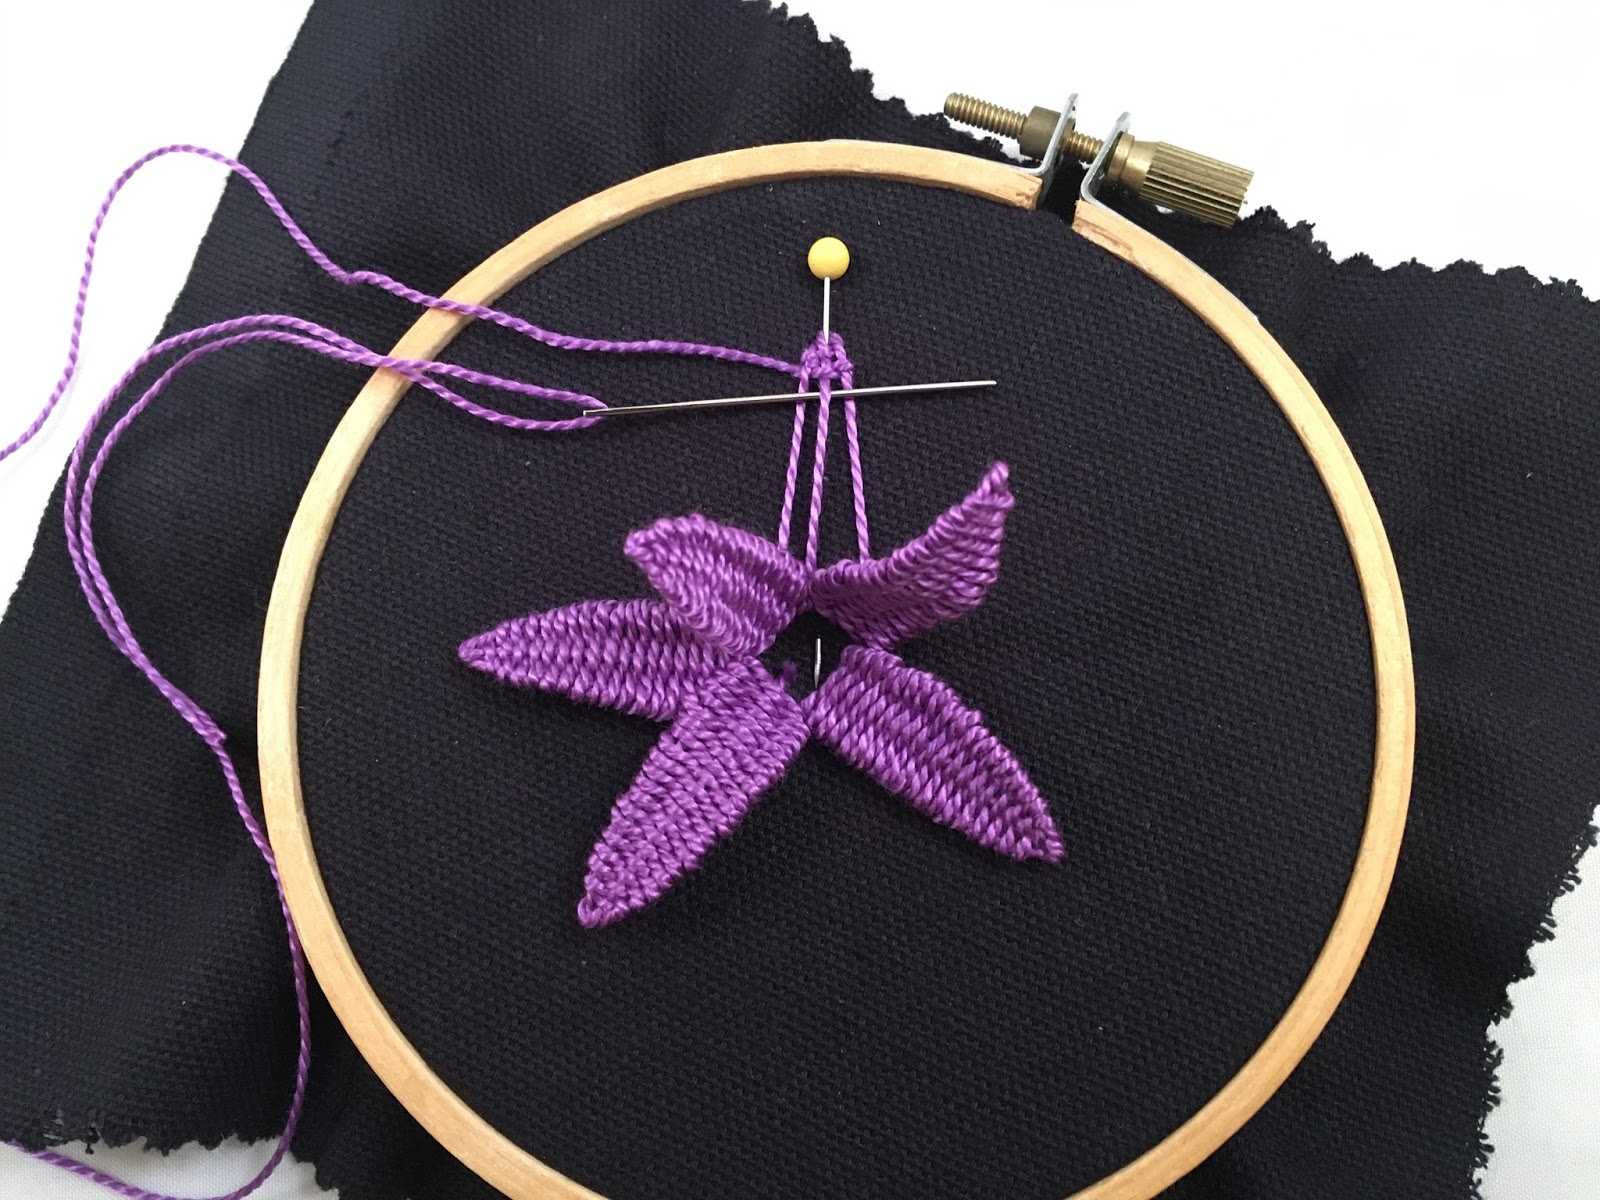 Longer Woven Picot stitch, a tutorial by Michelle for Mooshiestitch Monday on Feeling Stitchy